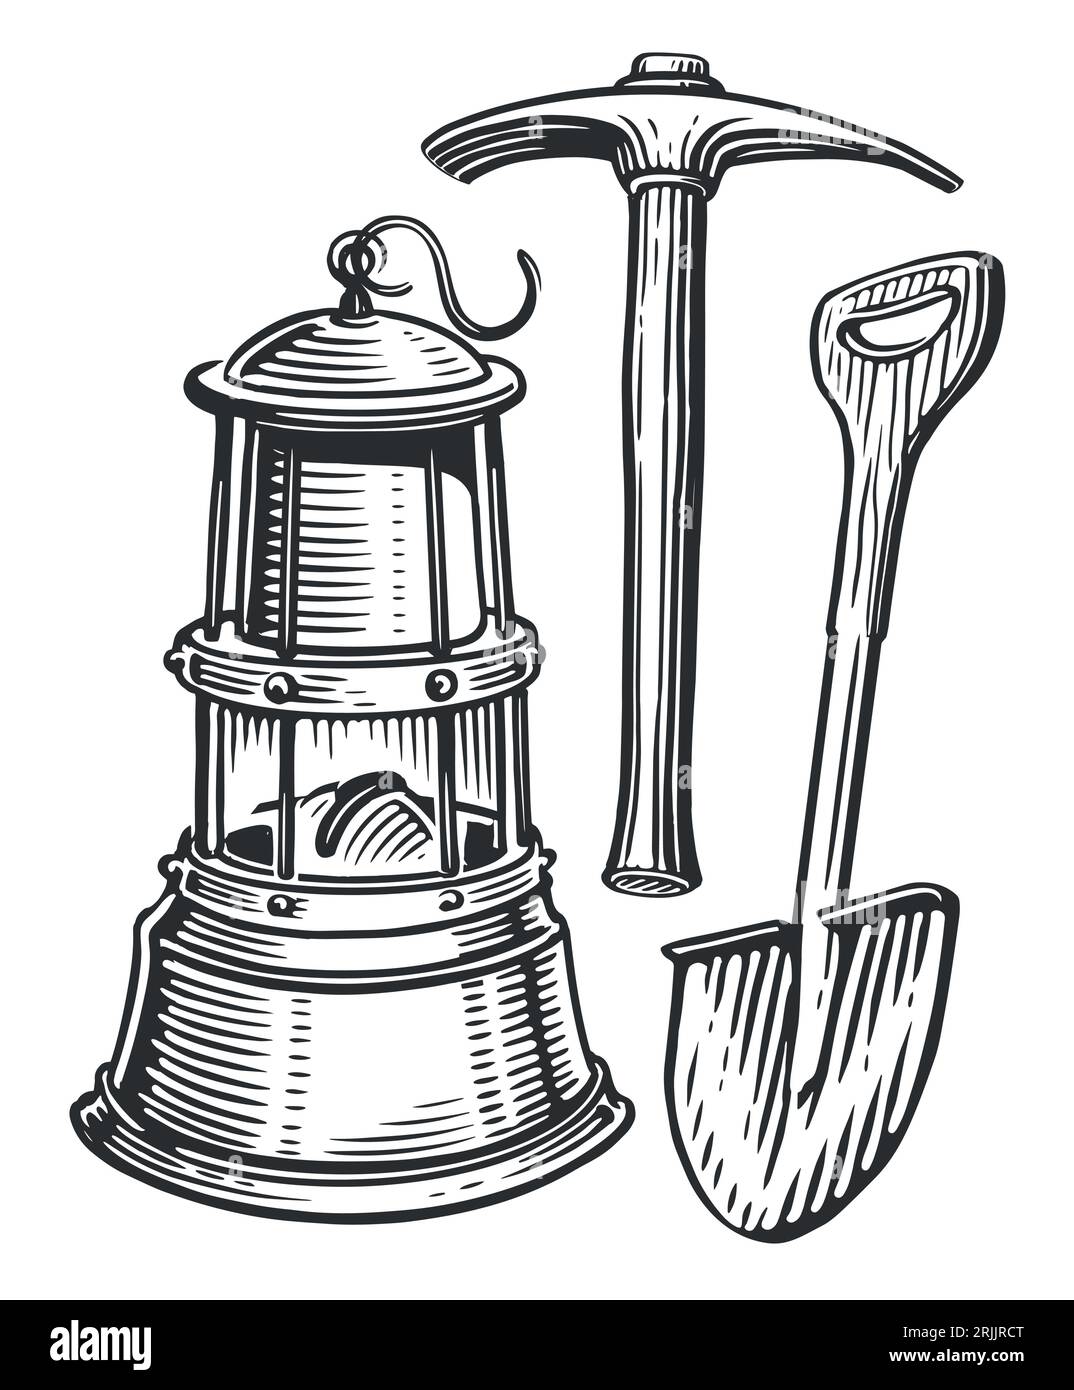 Mining tools, shovel, pickaxe and lantern in vintage engraving style. Sketch vector illustration Stock Vector